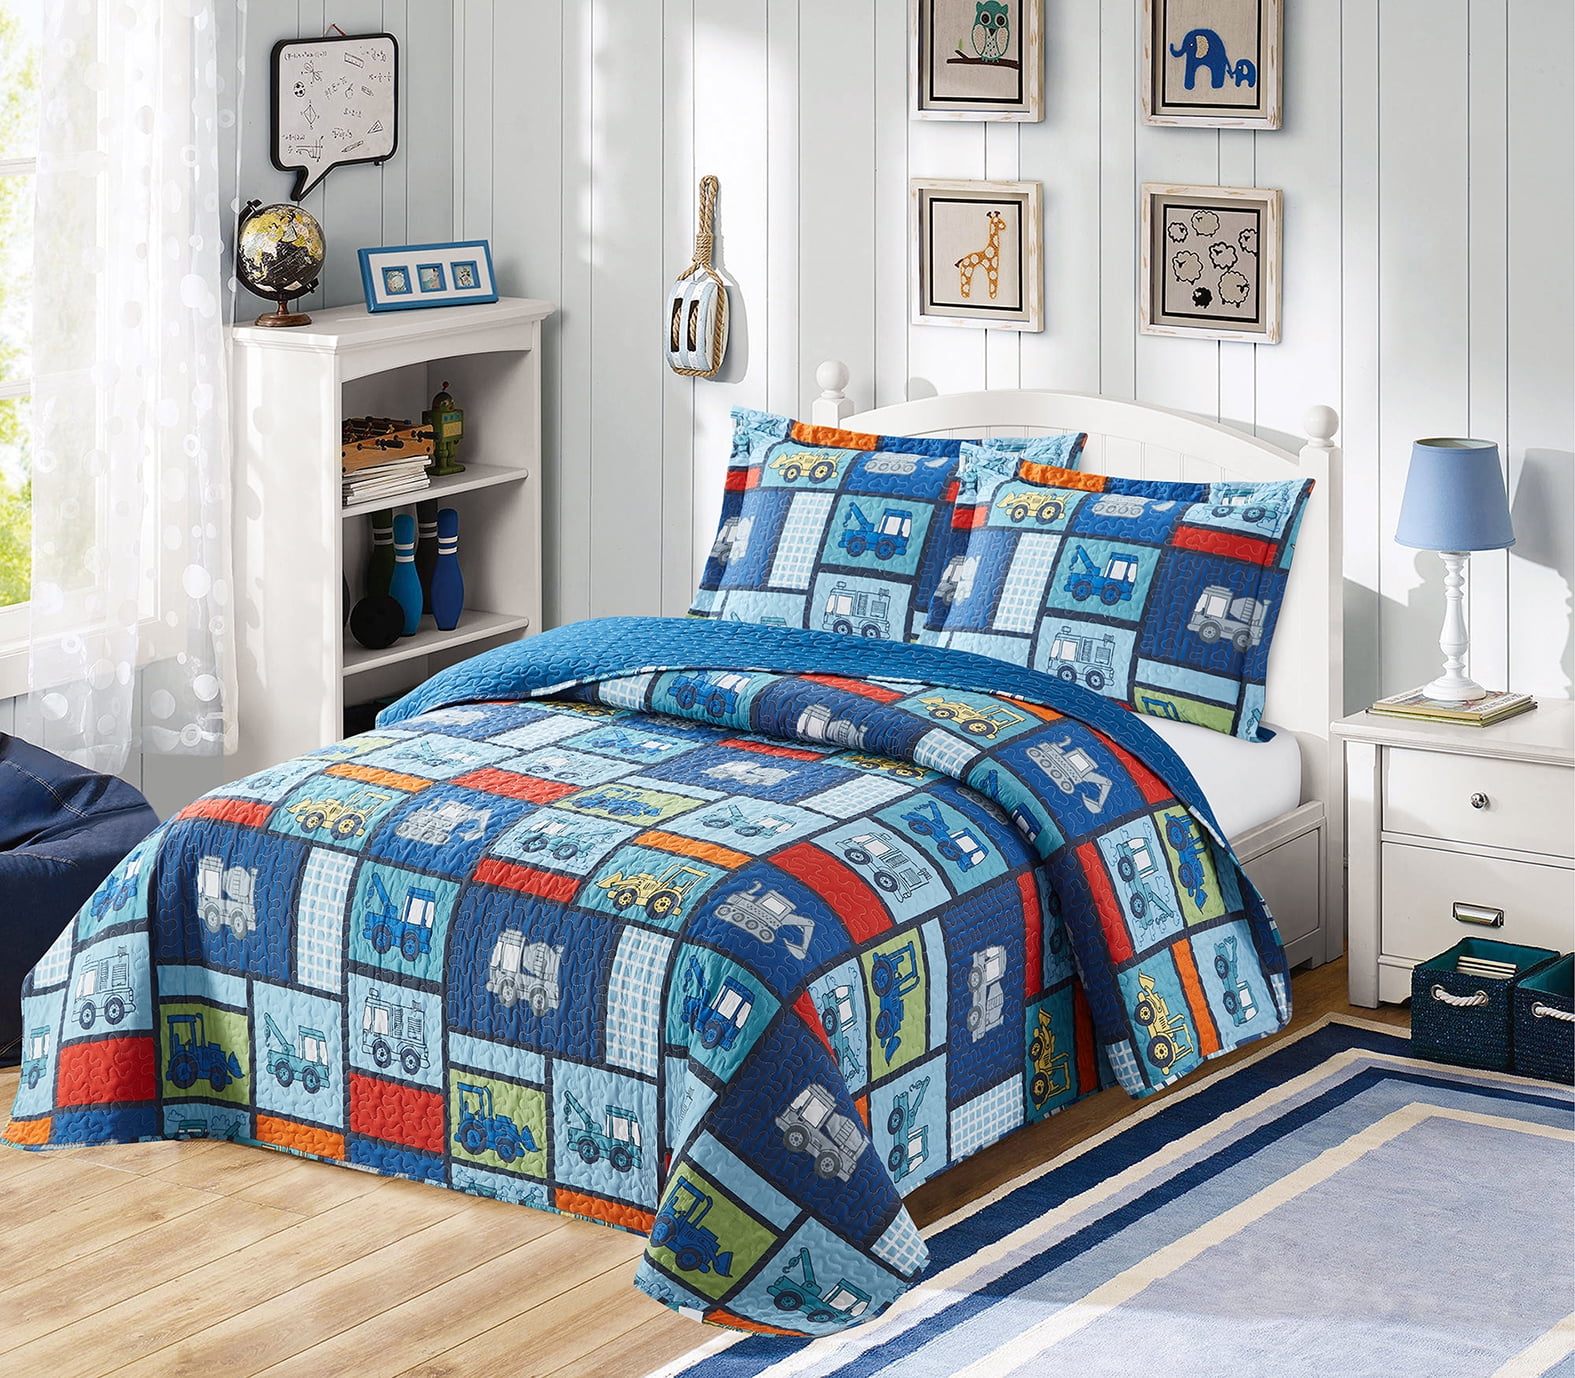 Kids Bedspread Quilts Throw Blanket, Boys Twin Quilt Bedding